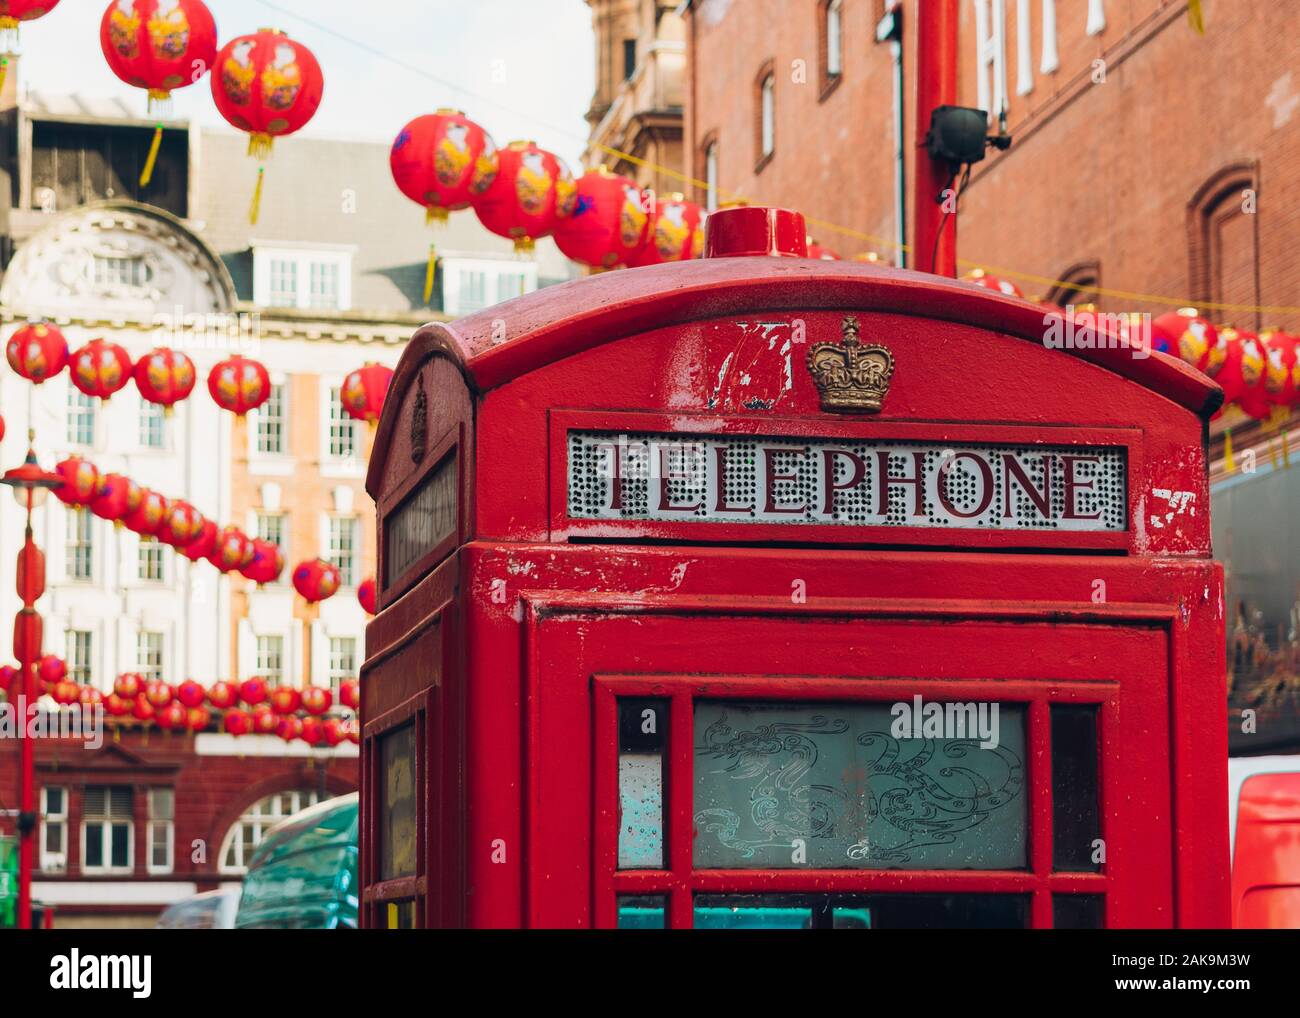 Typical London red telephone booth in Chinatown, Soho district Stock Photo